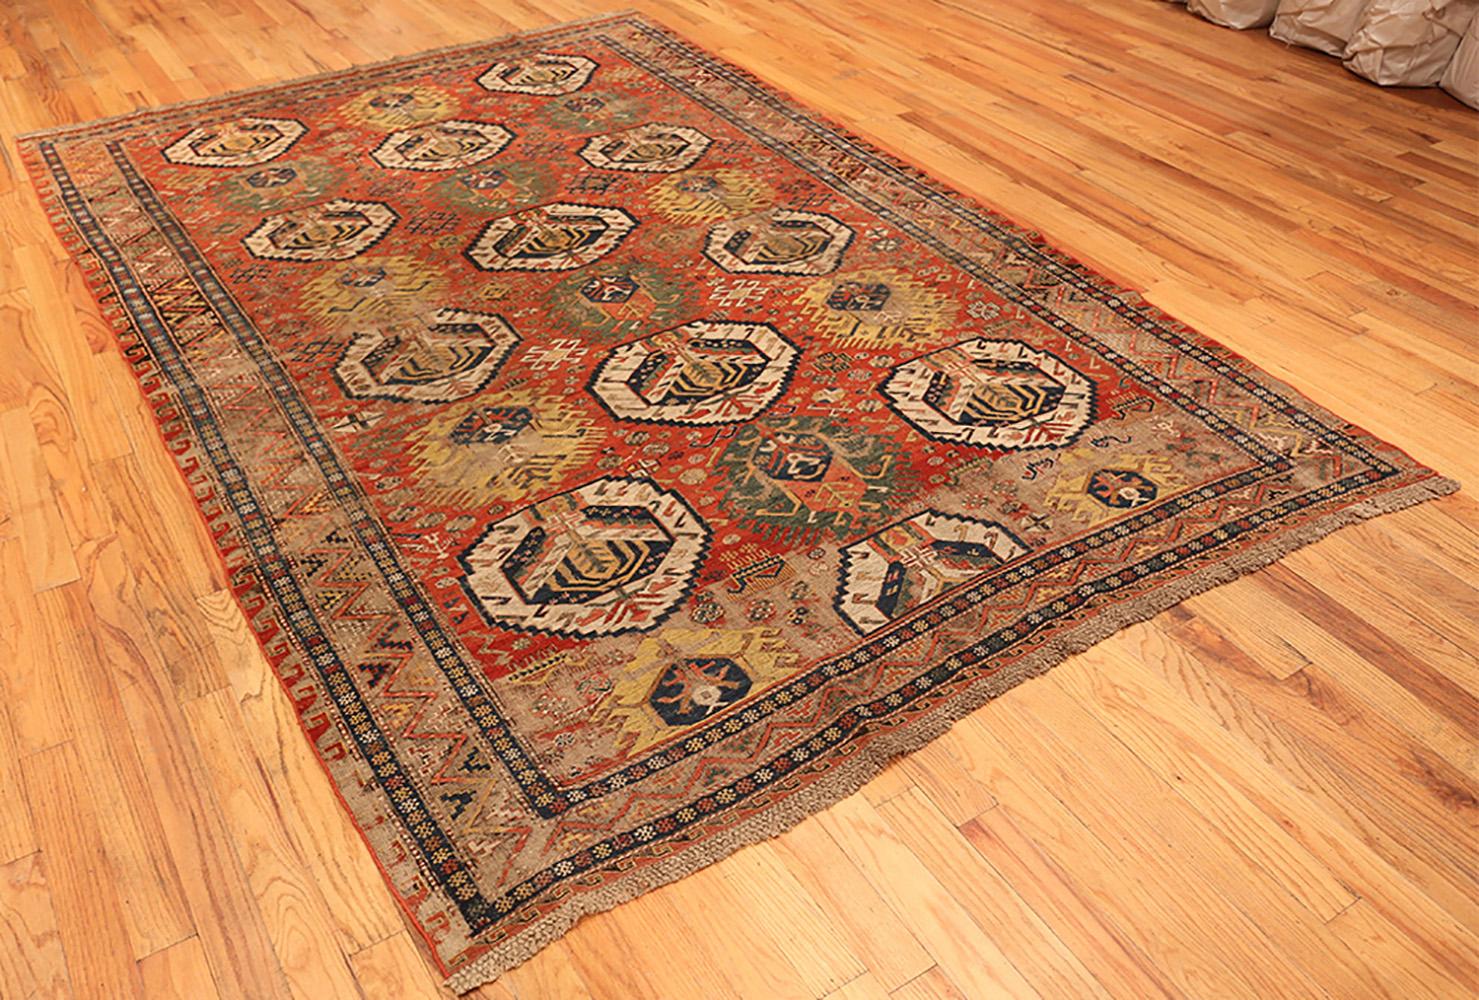 Antique Shabby Chic Tribal Caucasian Soumak. Size: 7 ft 4 in x 10 ft 3 in 1